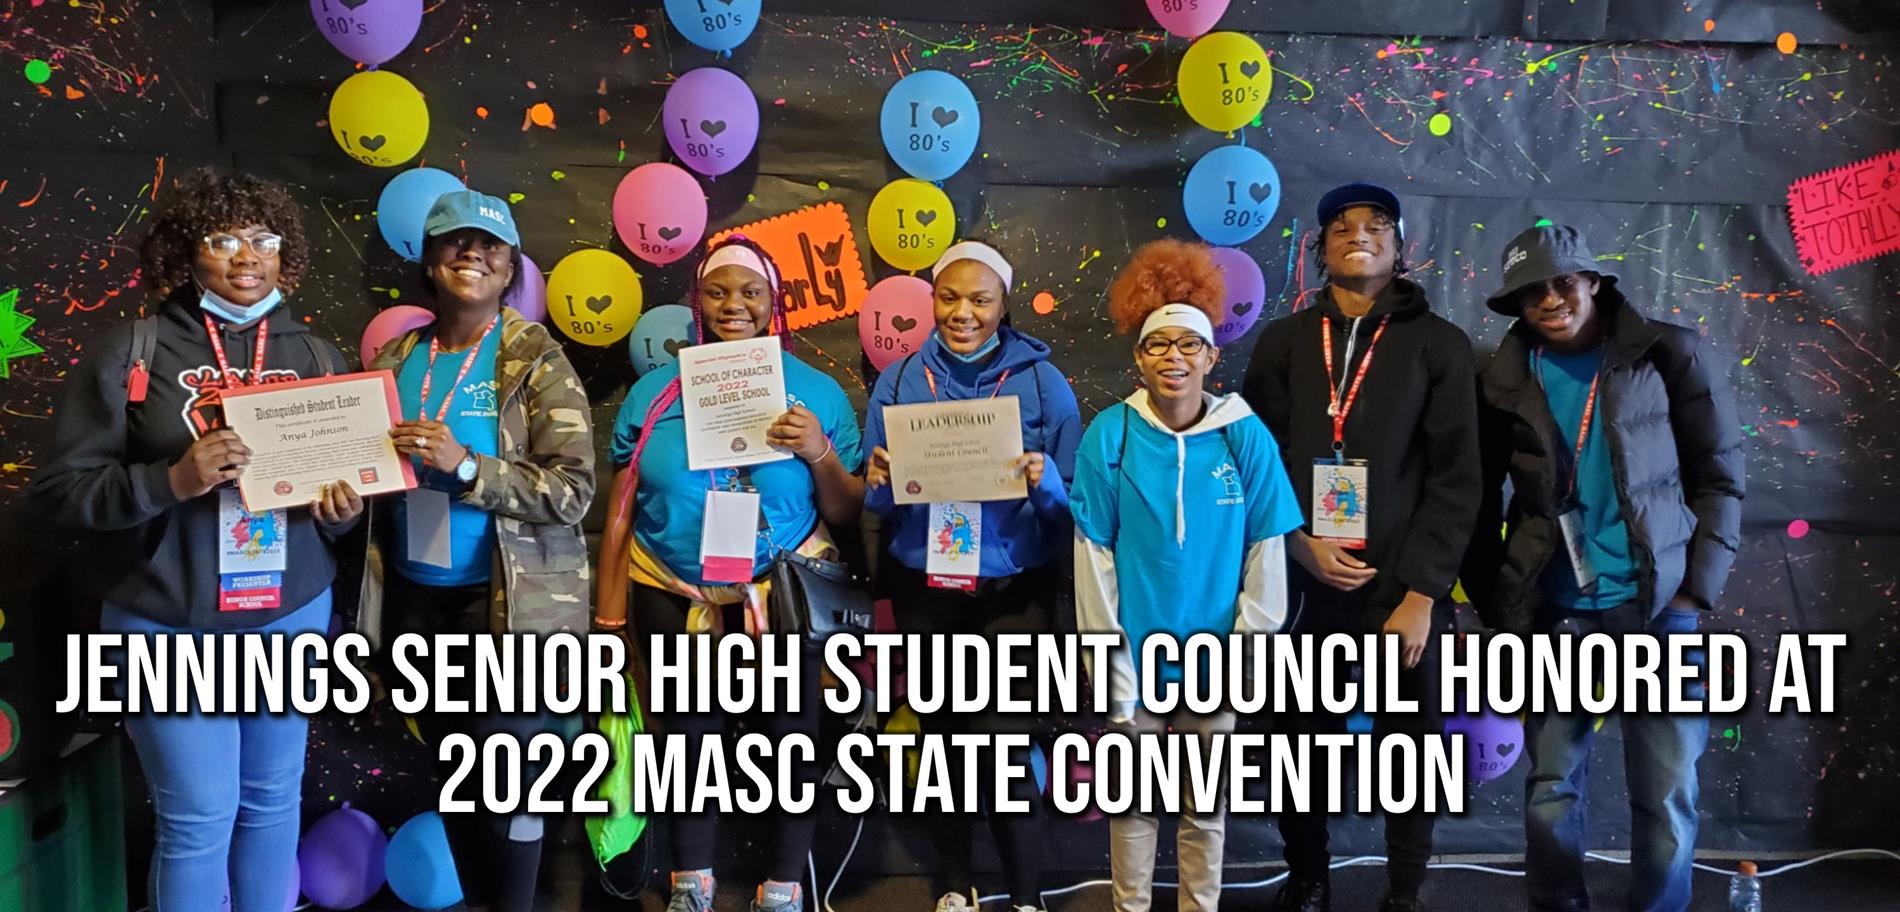 JSH Student Council honored at 2022 MASC State Convention